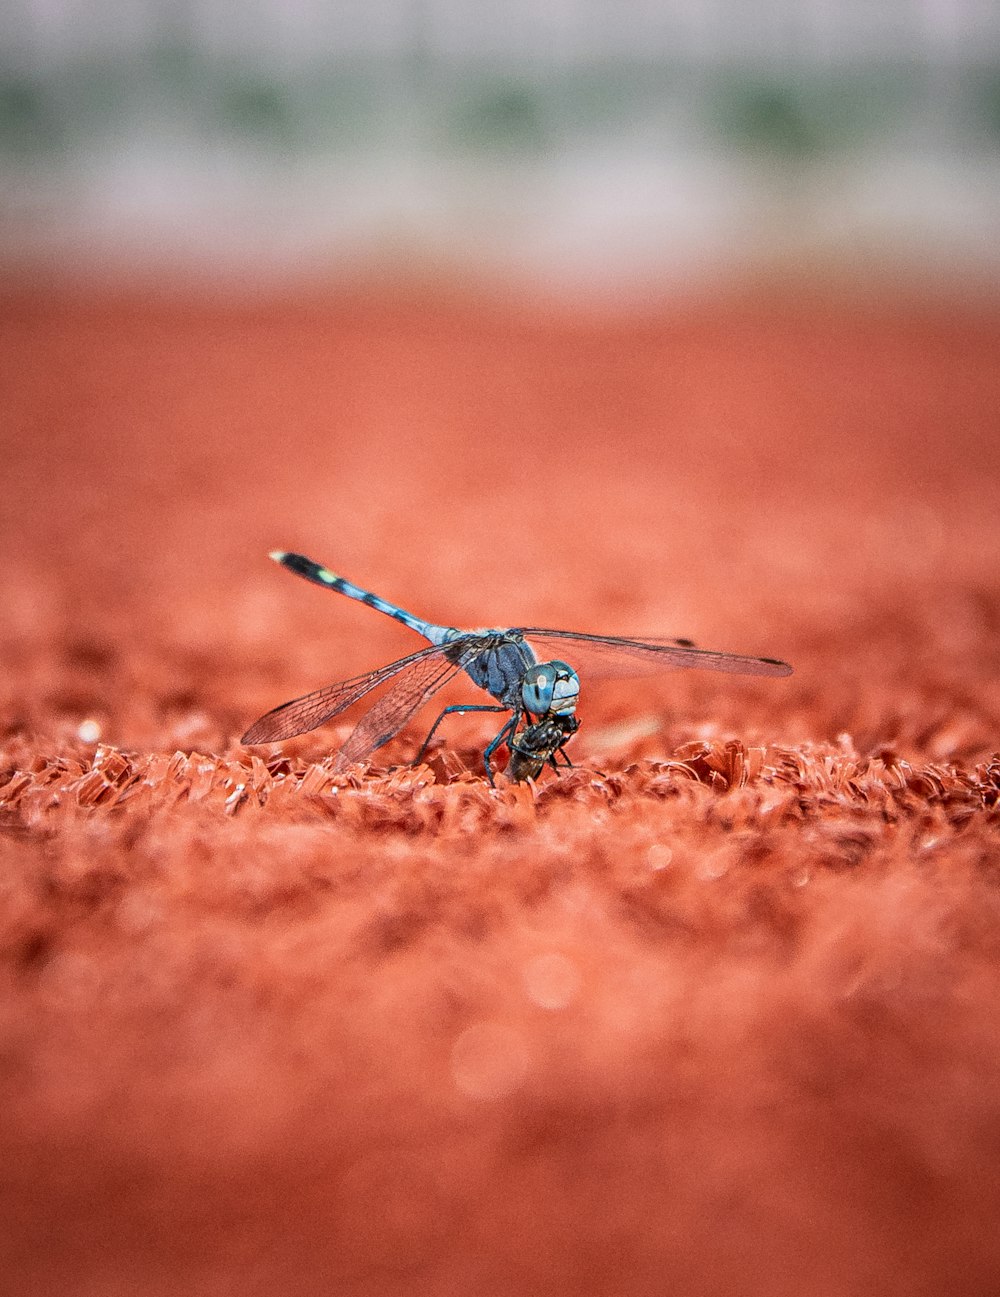 black and white dragonfly on red surface